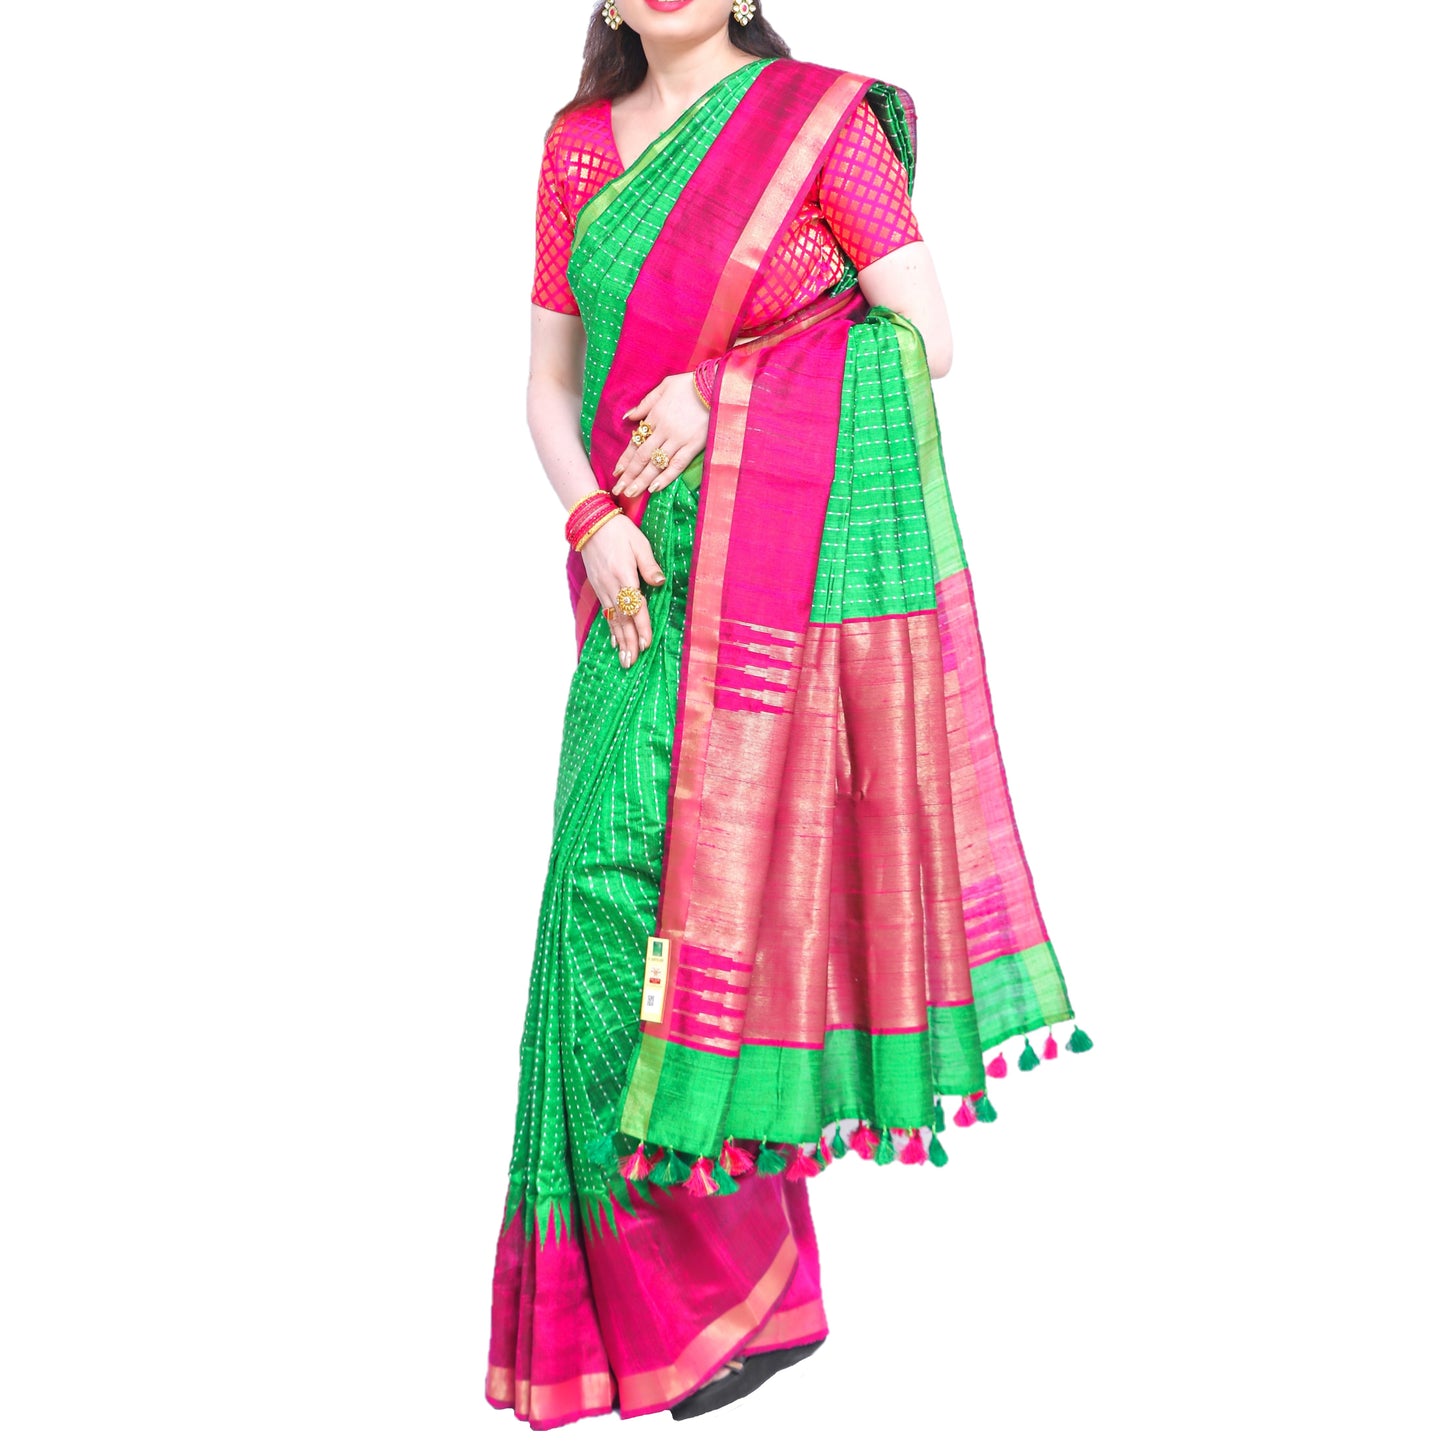 Pure Handloom Tussar Silk Saree - Green and Pink with Golden Zari and Temple Border